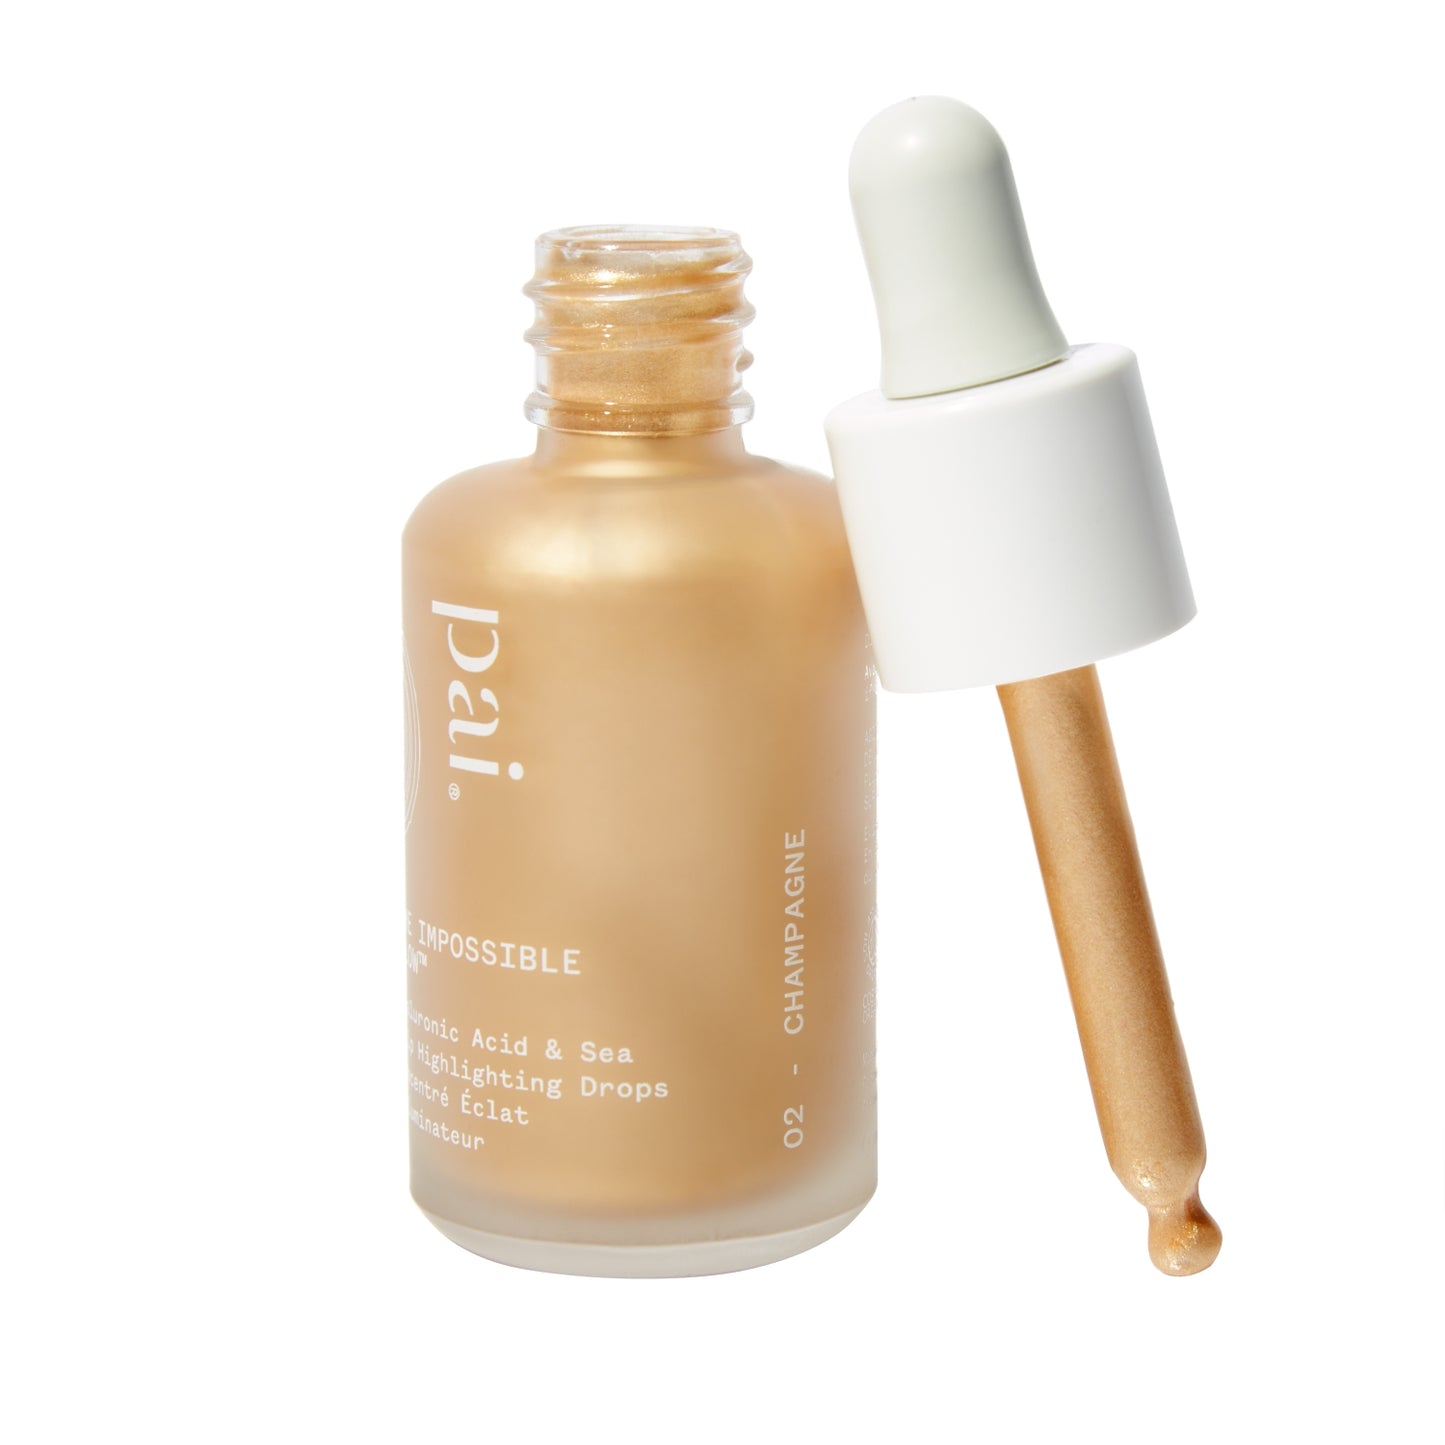 Pai - The Impossible Glow Champagne 30ml